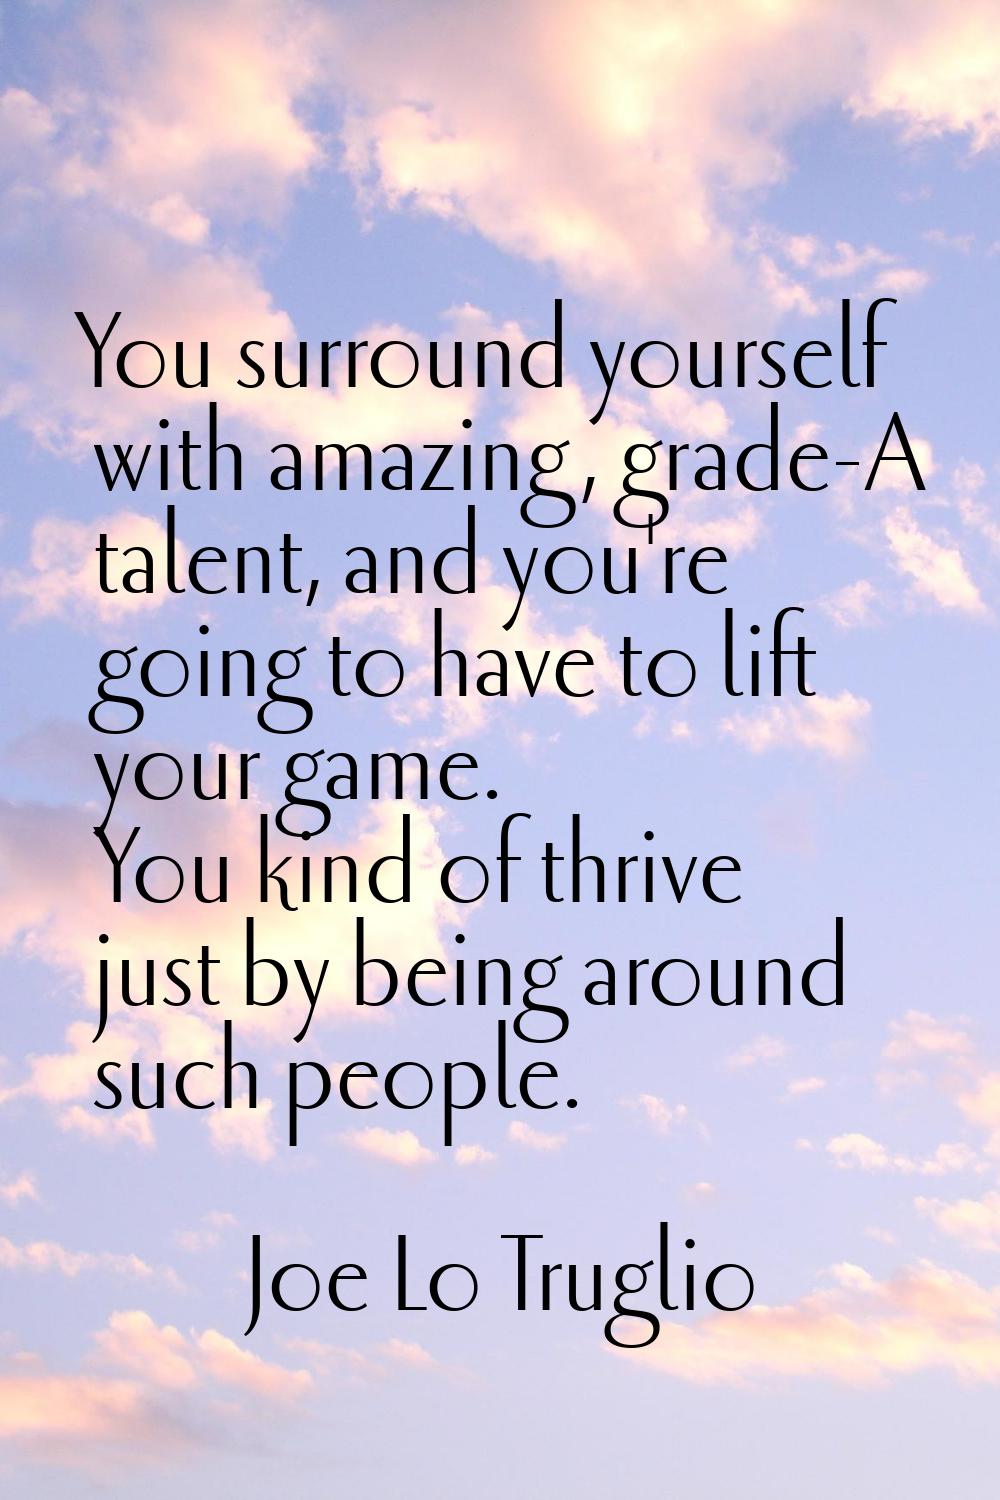 You surround yourself with amazing, grade-A talent, and you're going to have to lift your game. You